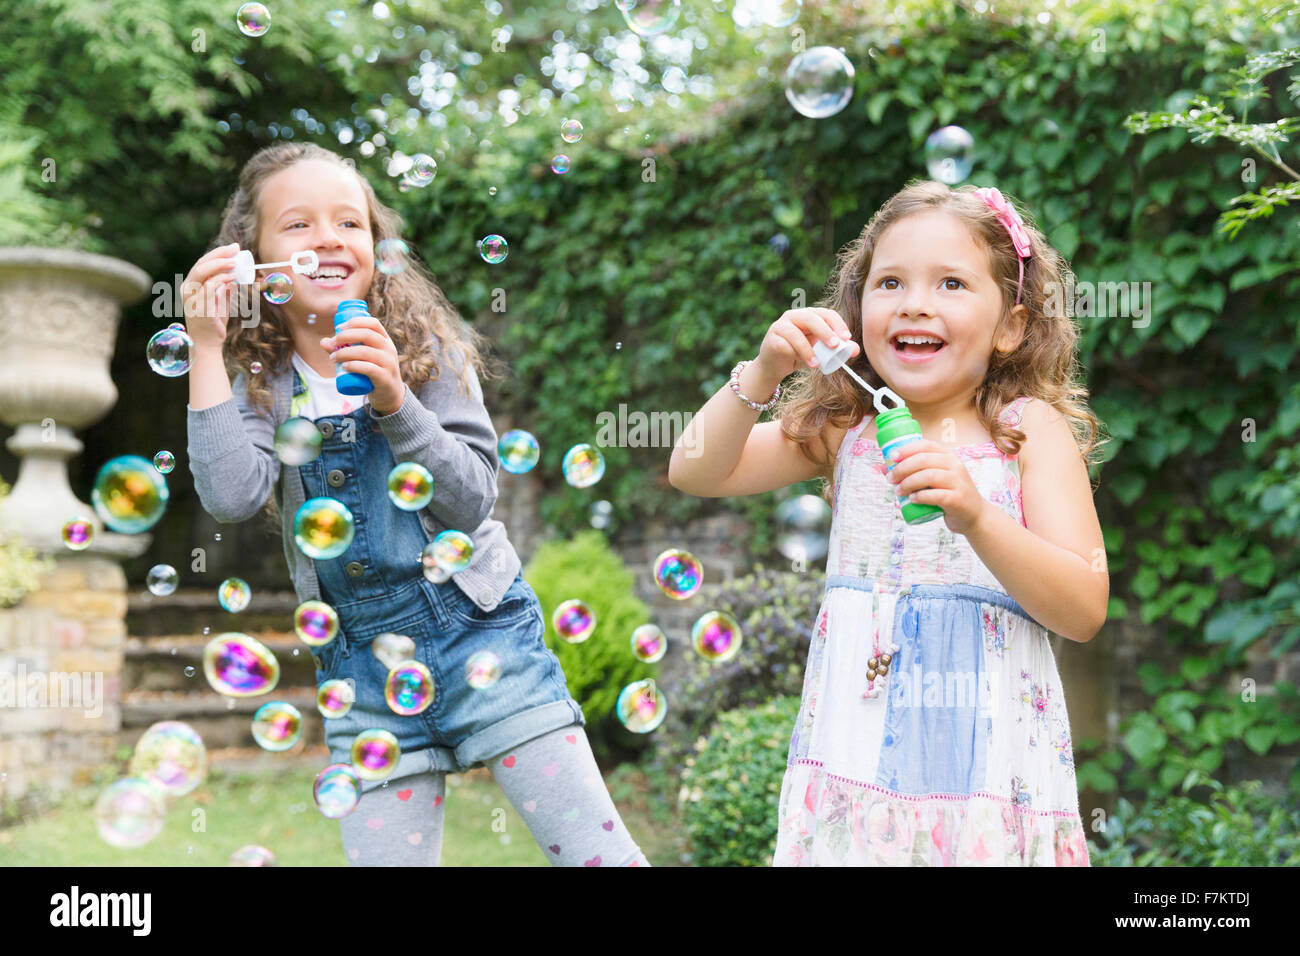 Carefree girls blowing bubbles in backyard Banque D'Images